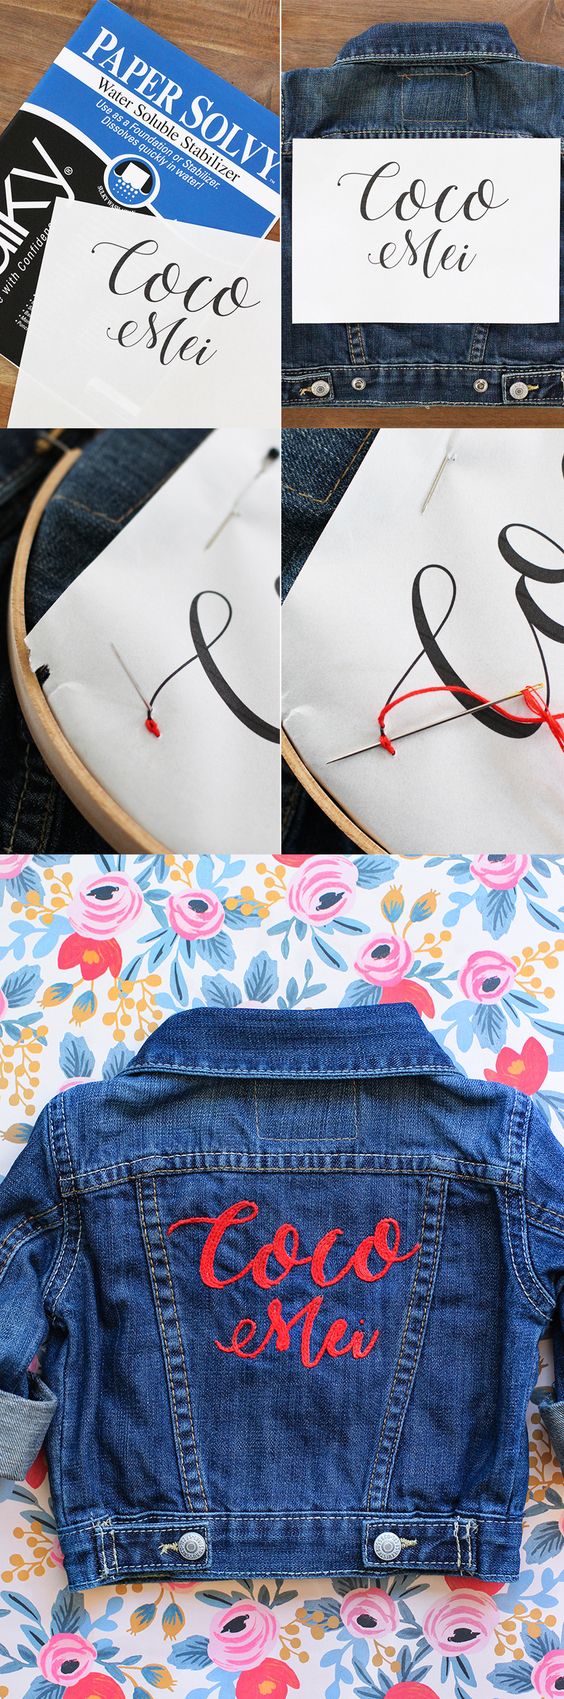 The Best DIY Ways To Upgrade Your Old Denim Jacket Into A Unique Part Of Your Spring Outfit